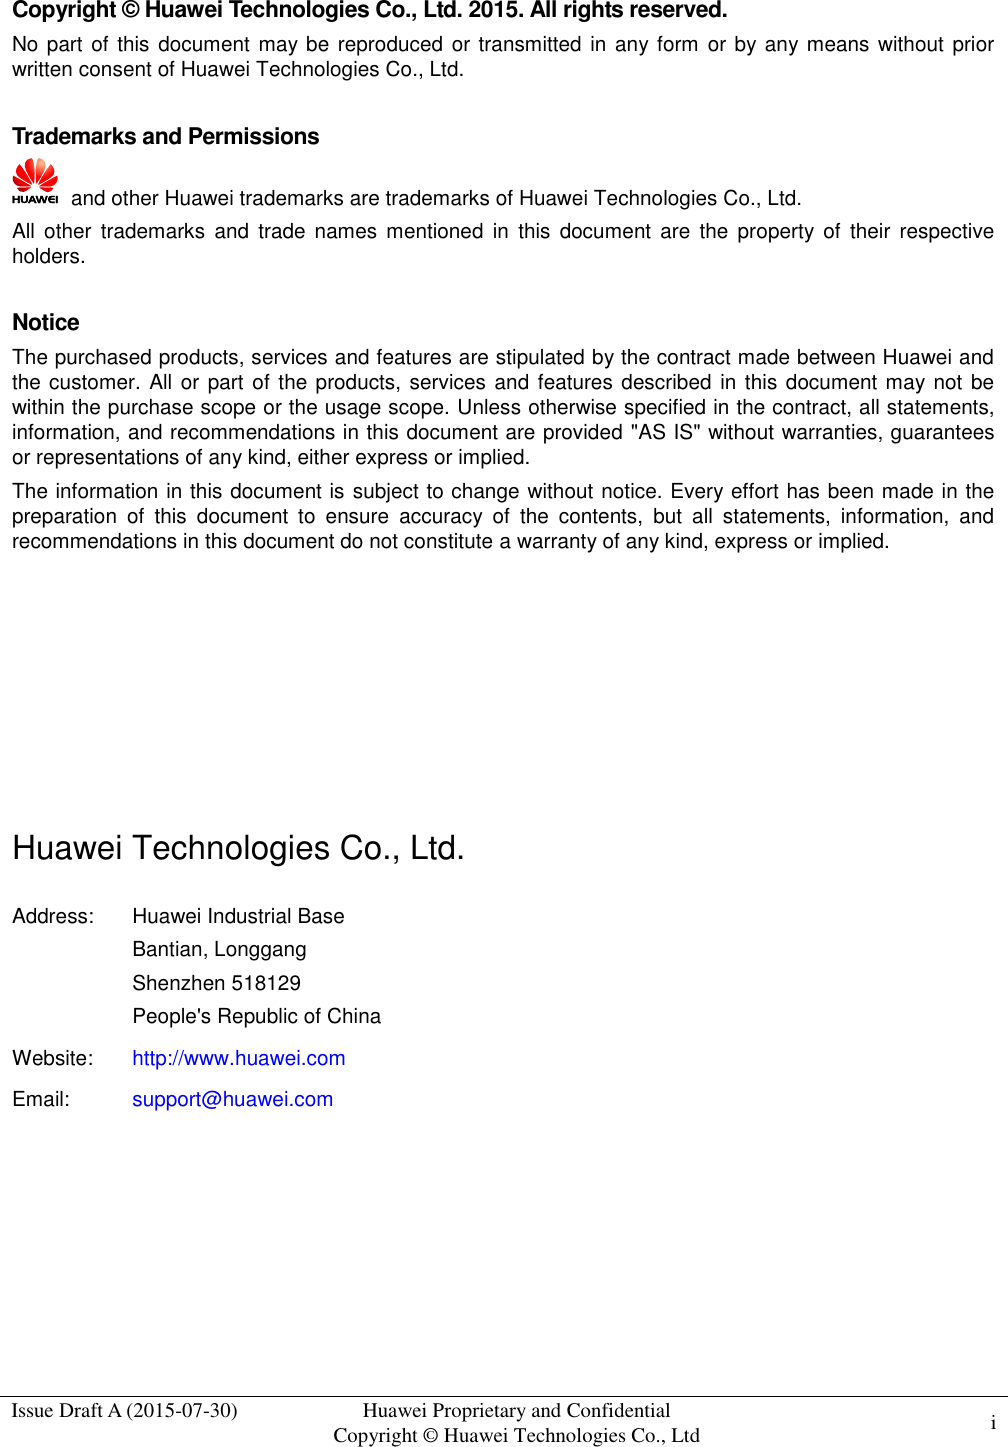  Issue Draft A (2015-07-30) Huawei Proprietary and Confidential           Copyright © Huawei Technologies Co., Ltd i     Copyright © Huawei Technologies Co., Ltd. 2015. All rights reserved. No part of this  document may be reproduced or transmitted in  any  form or by any means without prior written consent of Huawei Technologies Co., Ltd.  Trademarks and Permissions   and other Huawei trademarks are trademarks of Huawei Technologies Co., Ltd. All  other  trademarks  and  trade names mentioned  in  this  document are  the  property  of  their  respective holders.  Notice The purchased products, services and features are stipulated by the contract made between Huawei and the customer. All or part of the products, services and features described in this document may not  be within the purchase scope or the usage scope. Unless otherwise specified in the contract, all statements, information, and recommendations in this document are provided &quot;AS IS&quot; without warranties, guarantees or representations of any kind, either express or implied. The information in this document is subject to change without notice. Every effort has been made in the preparation  of  this  document  to  ensure  accuracy  of  the  contents,  but  all  statements,  information,  and recommendations in this document do not constitute a warranty of any kind, express or implied.       Huawei Technologies Co., Ltd. Address: Huawei Industrial Base Bantian, Longgang Shenzhen 518129 People&apos;s Republic of China Website: http://www.huawei.com Email: support@huawei.com   